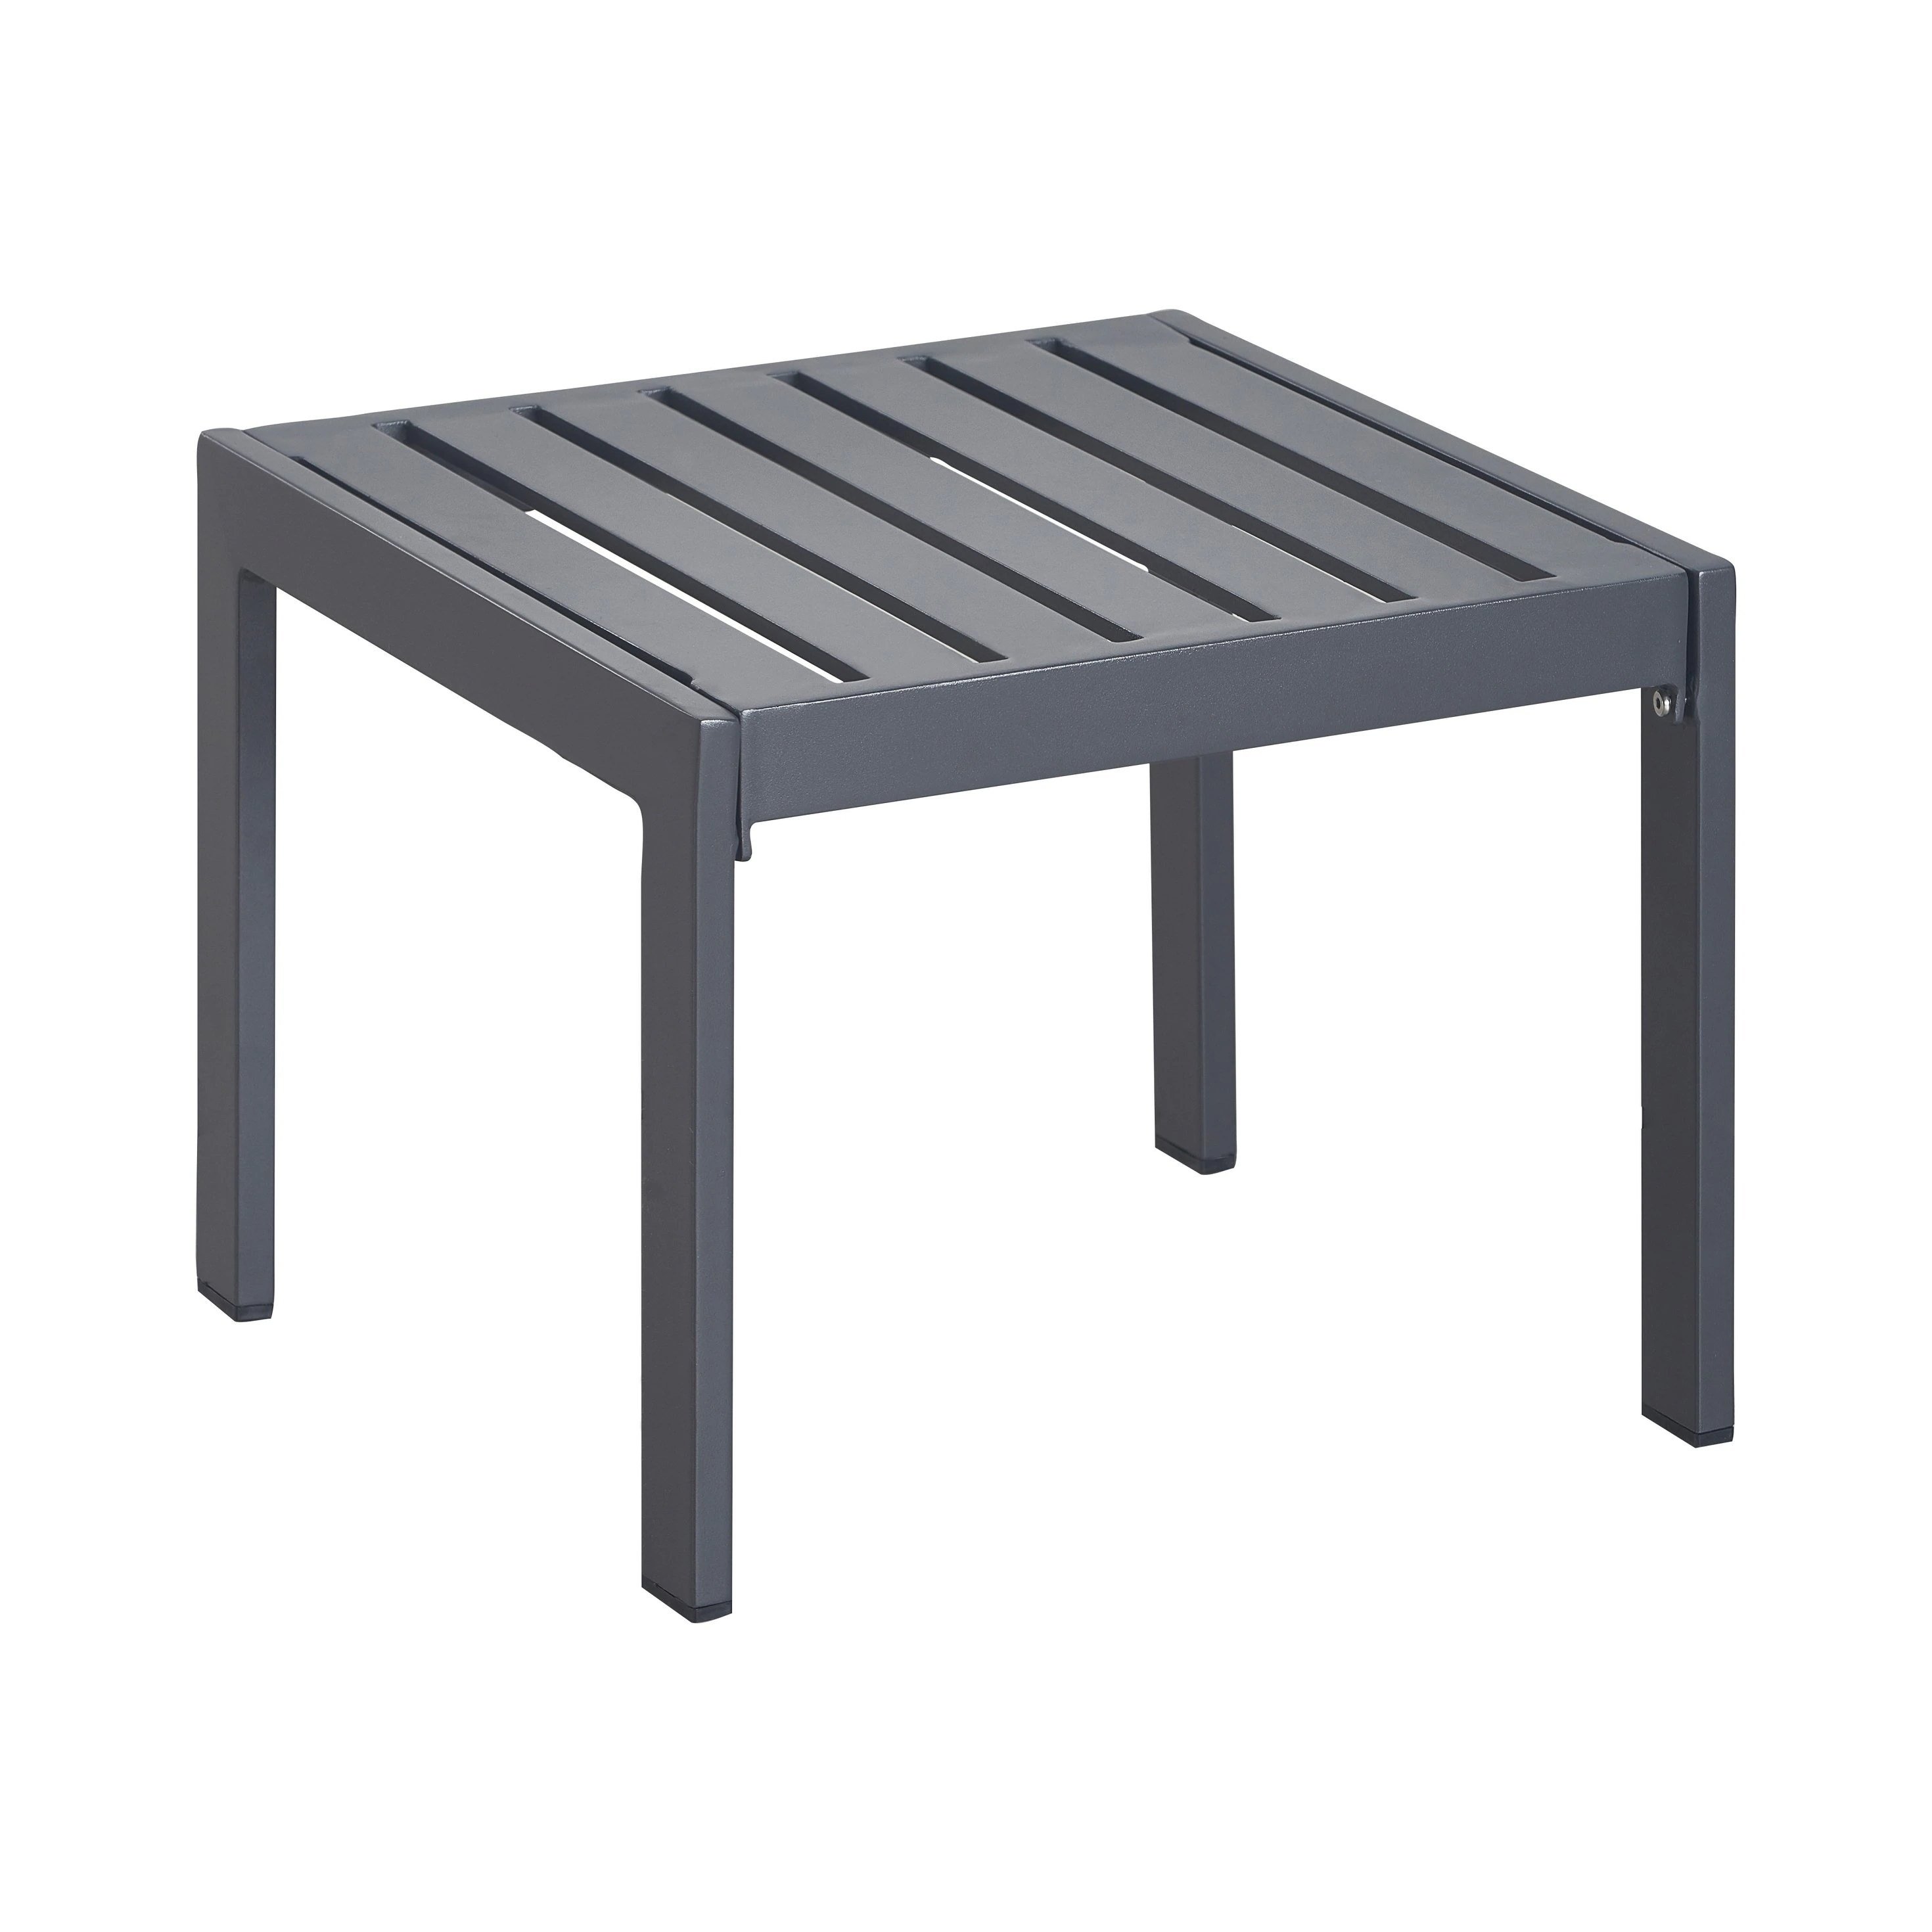 tommy hilfiger monterey outdoor side table gray gunmetal free shipping today ikea garden chairs hampton bay wicker furniture uttermost round accent large pretty storage boxes